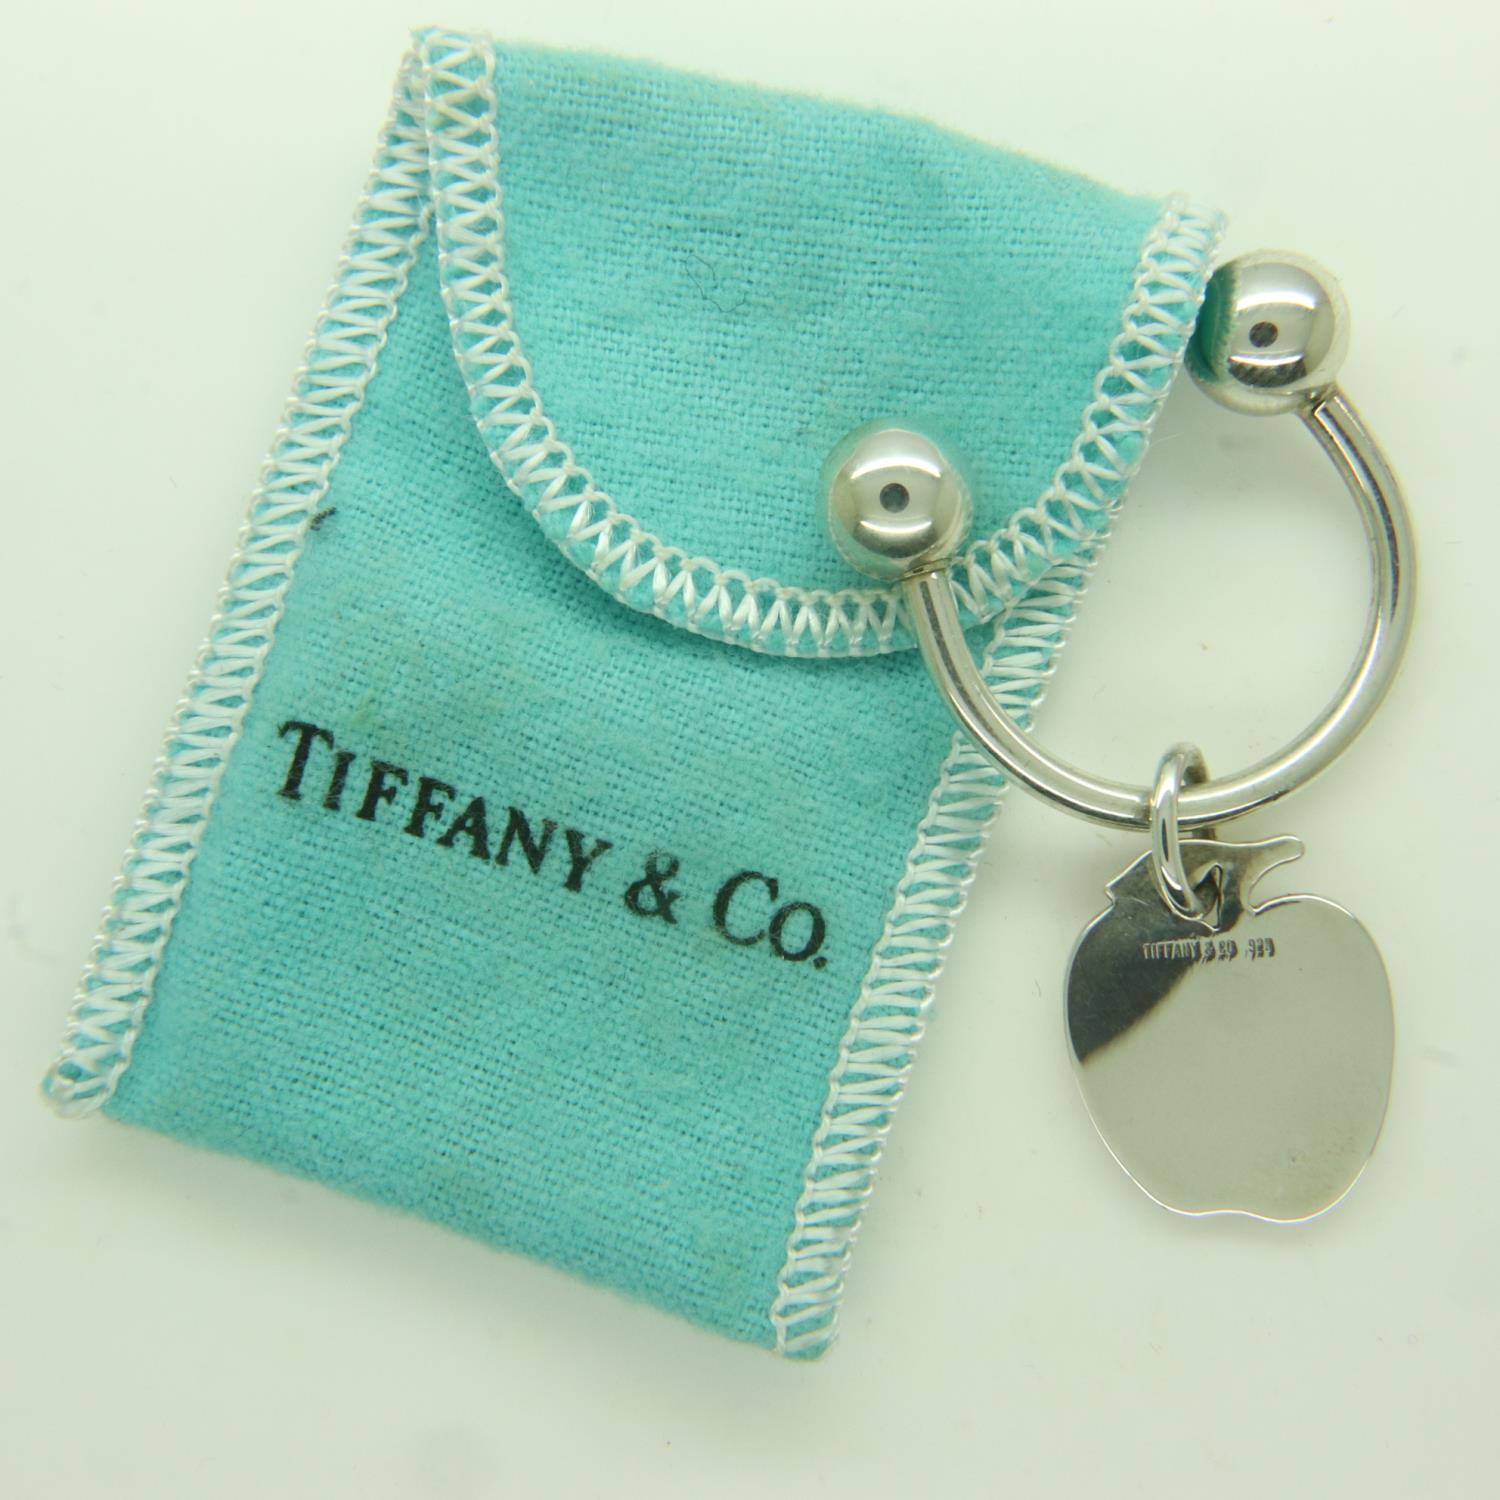 Tiffany & Co silver torq-form keyring with apple charm, in Tiffany fabric pouch, 10g. UK P&P Group 0